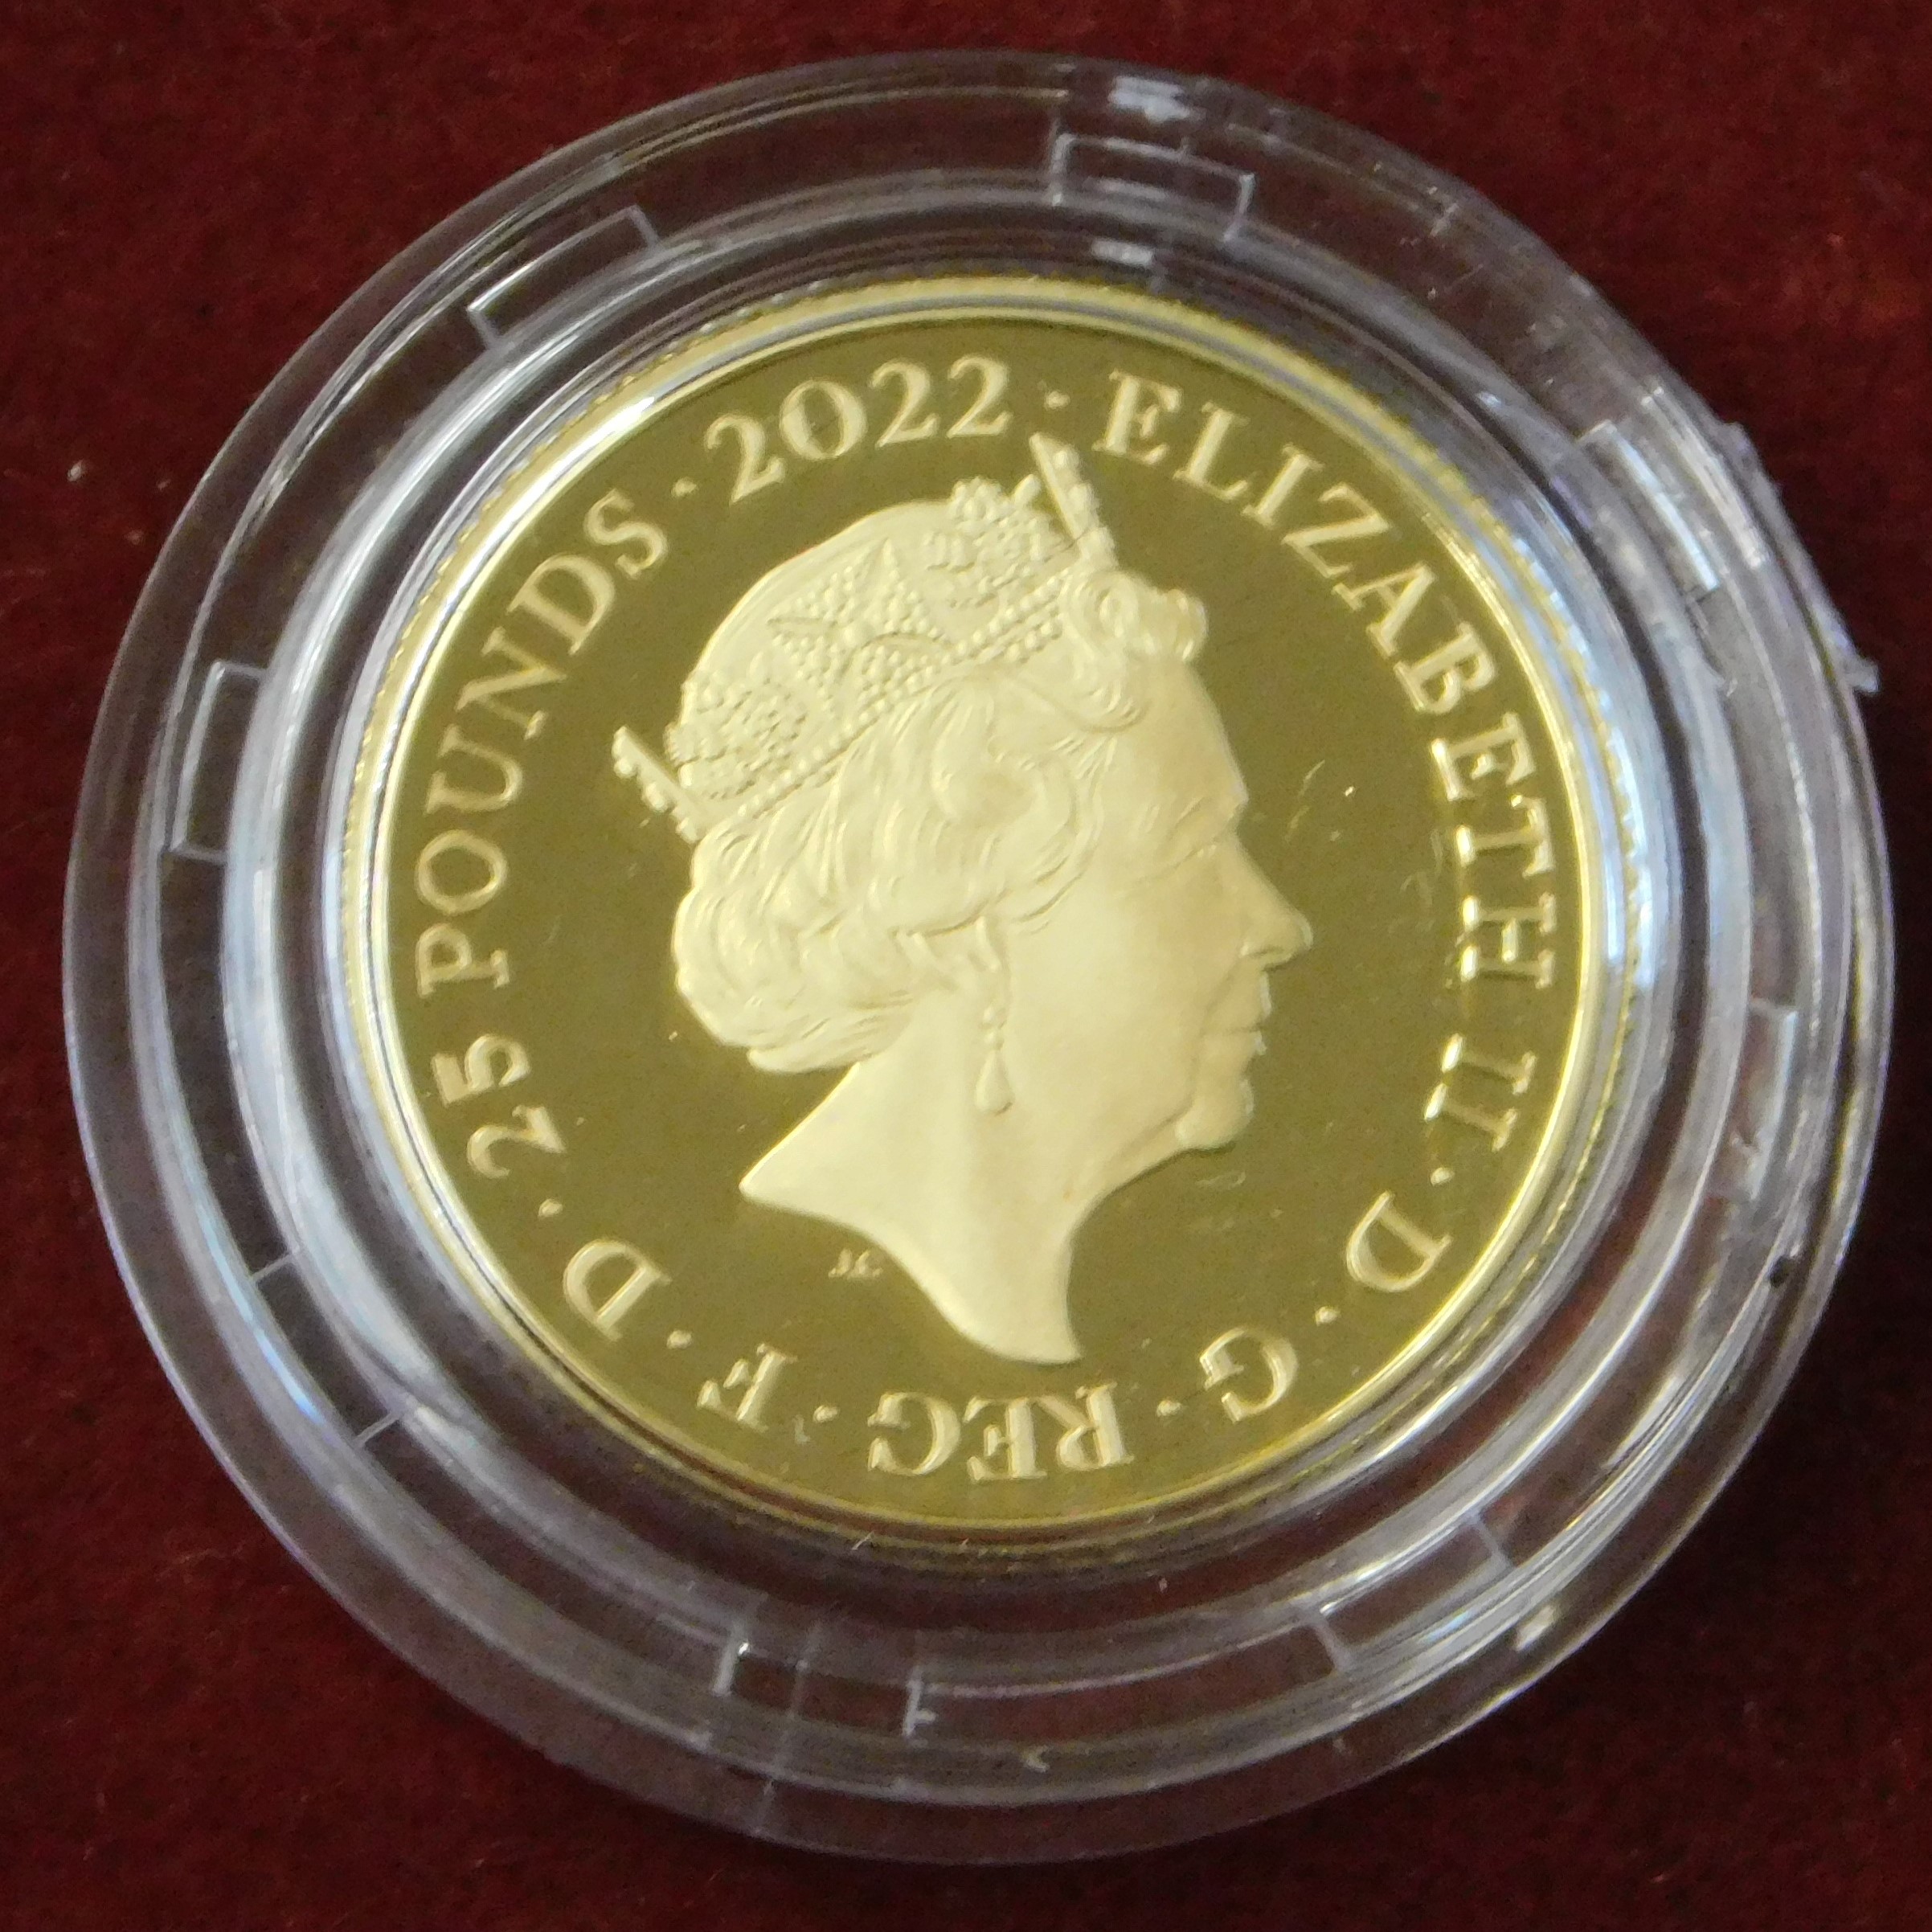 Gold 2022 United Kingdom Queen's Honours and Investitures quarter ounce proof coin, Royal Mint and - Image 2 of 4